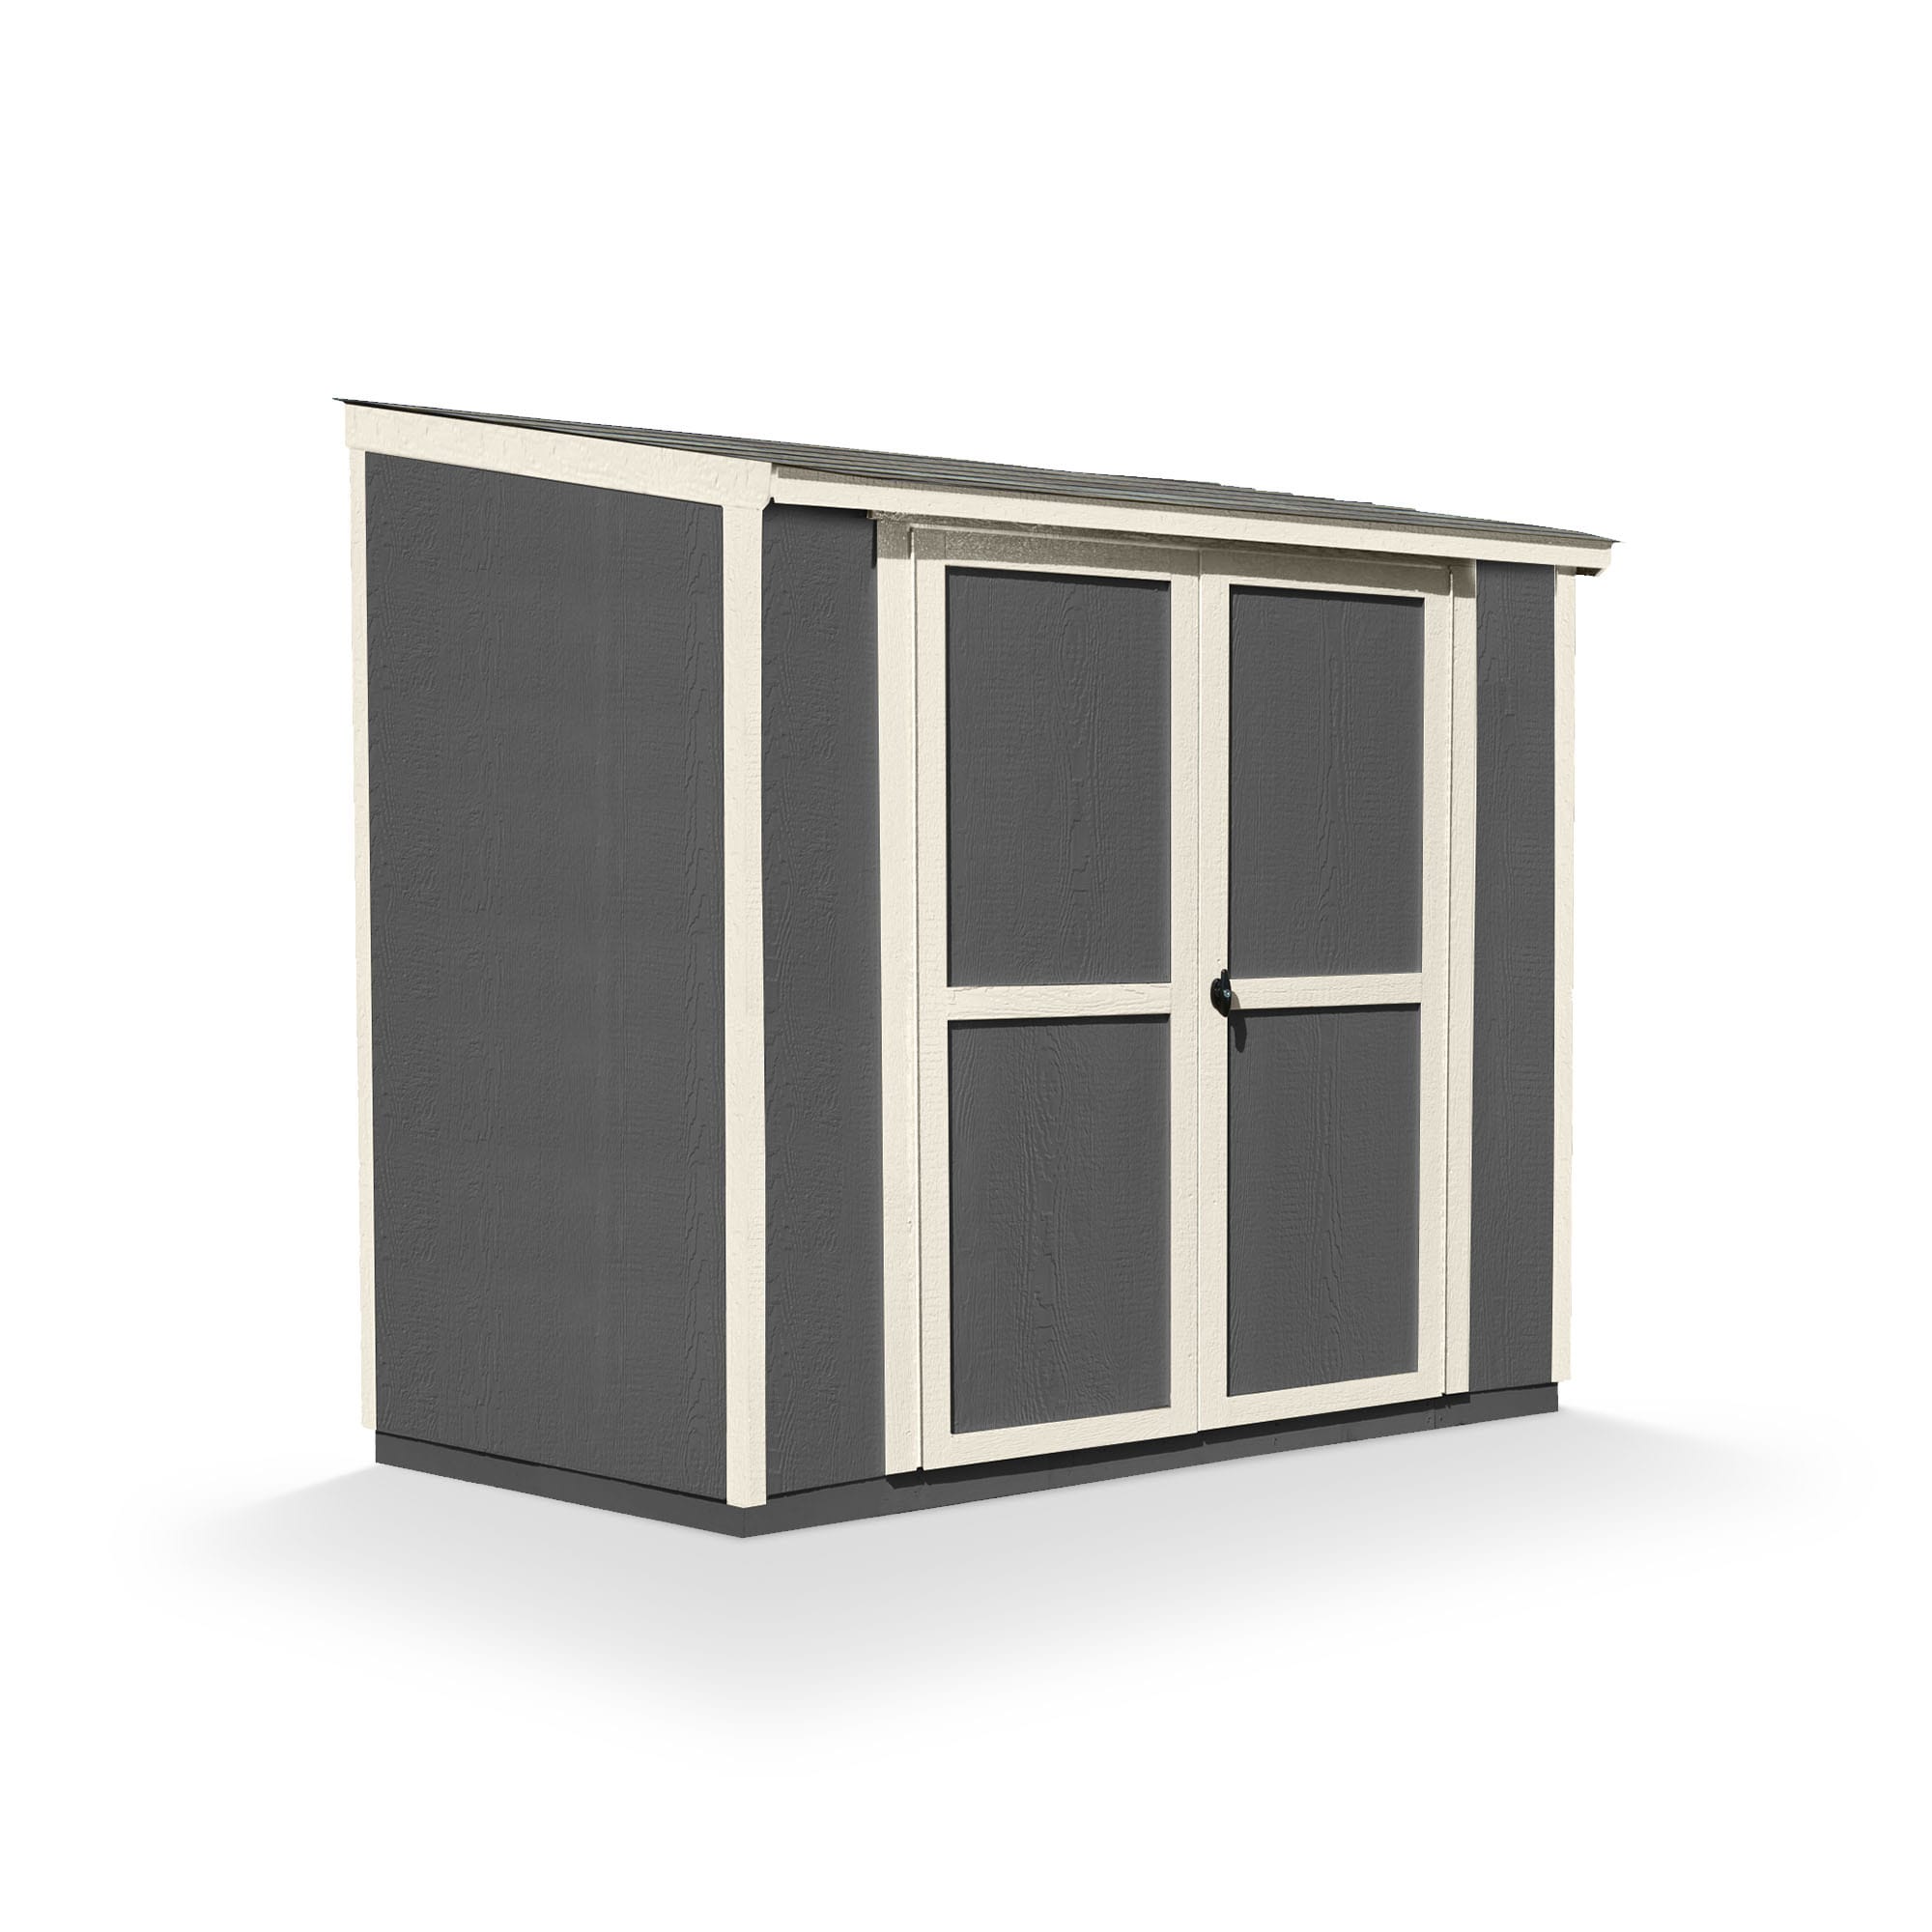 Garden sheds: how to choose the right storage solution